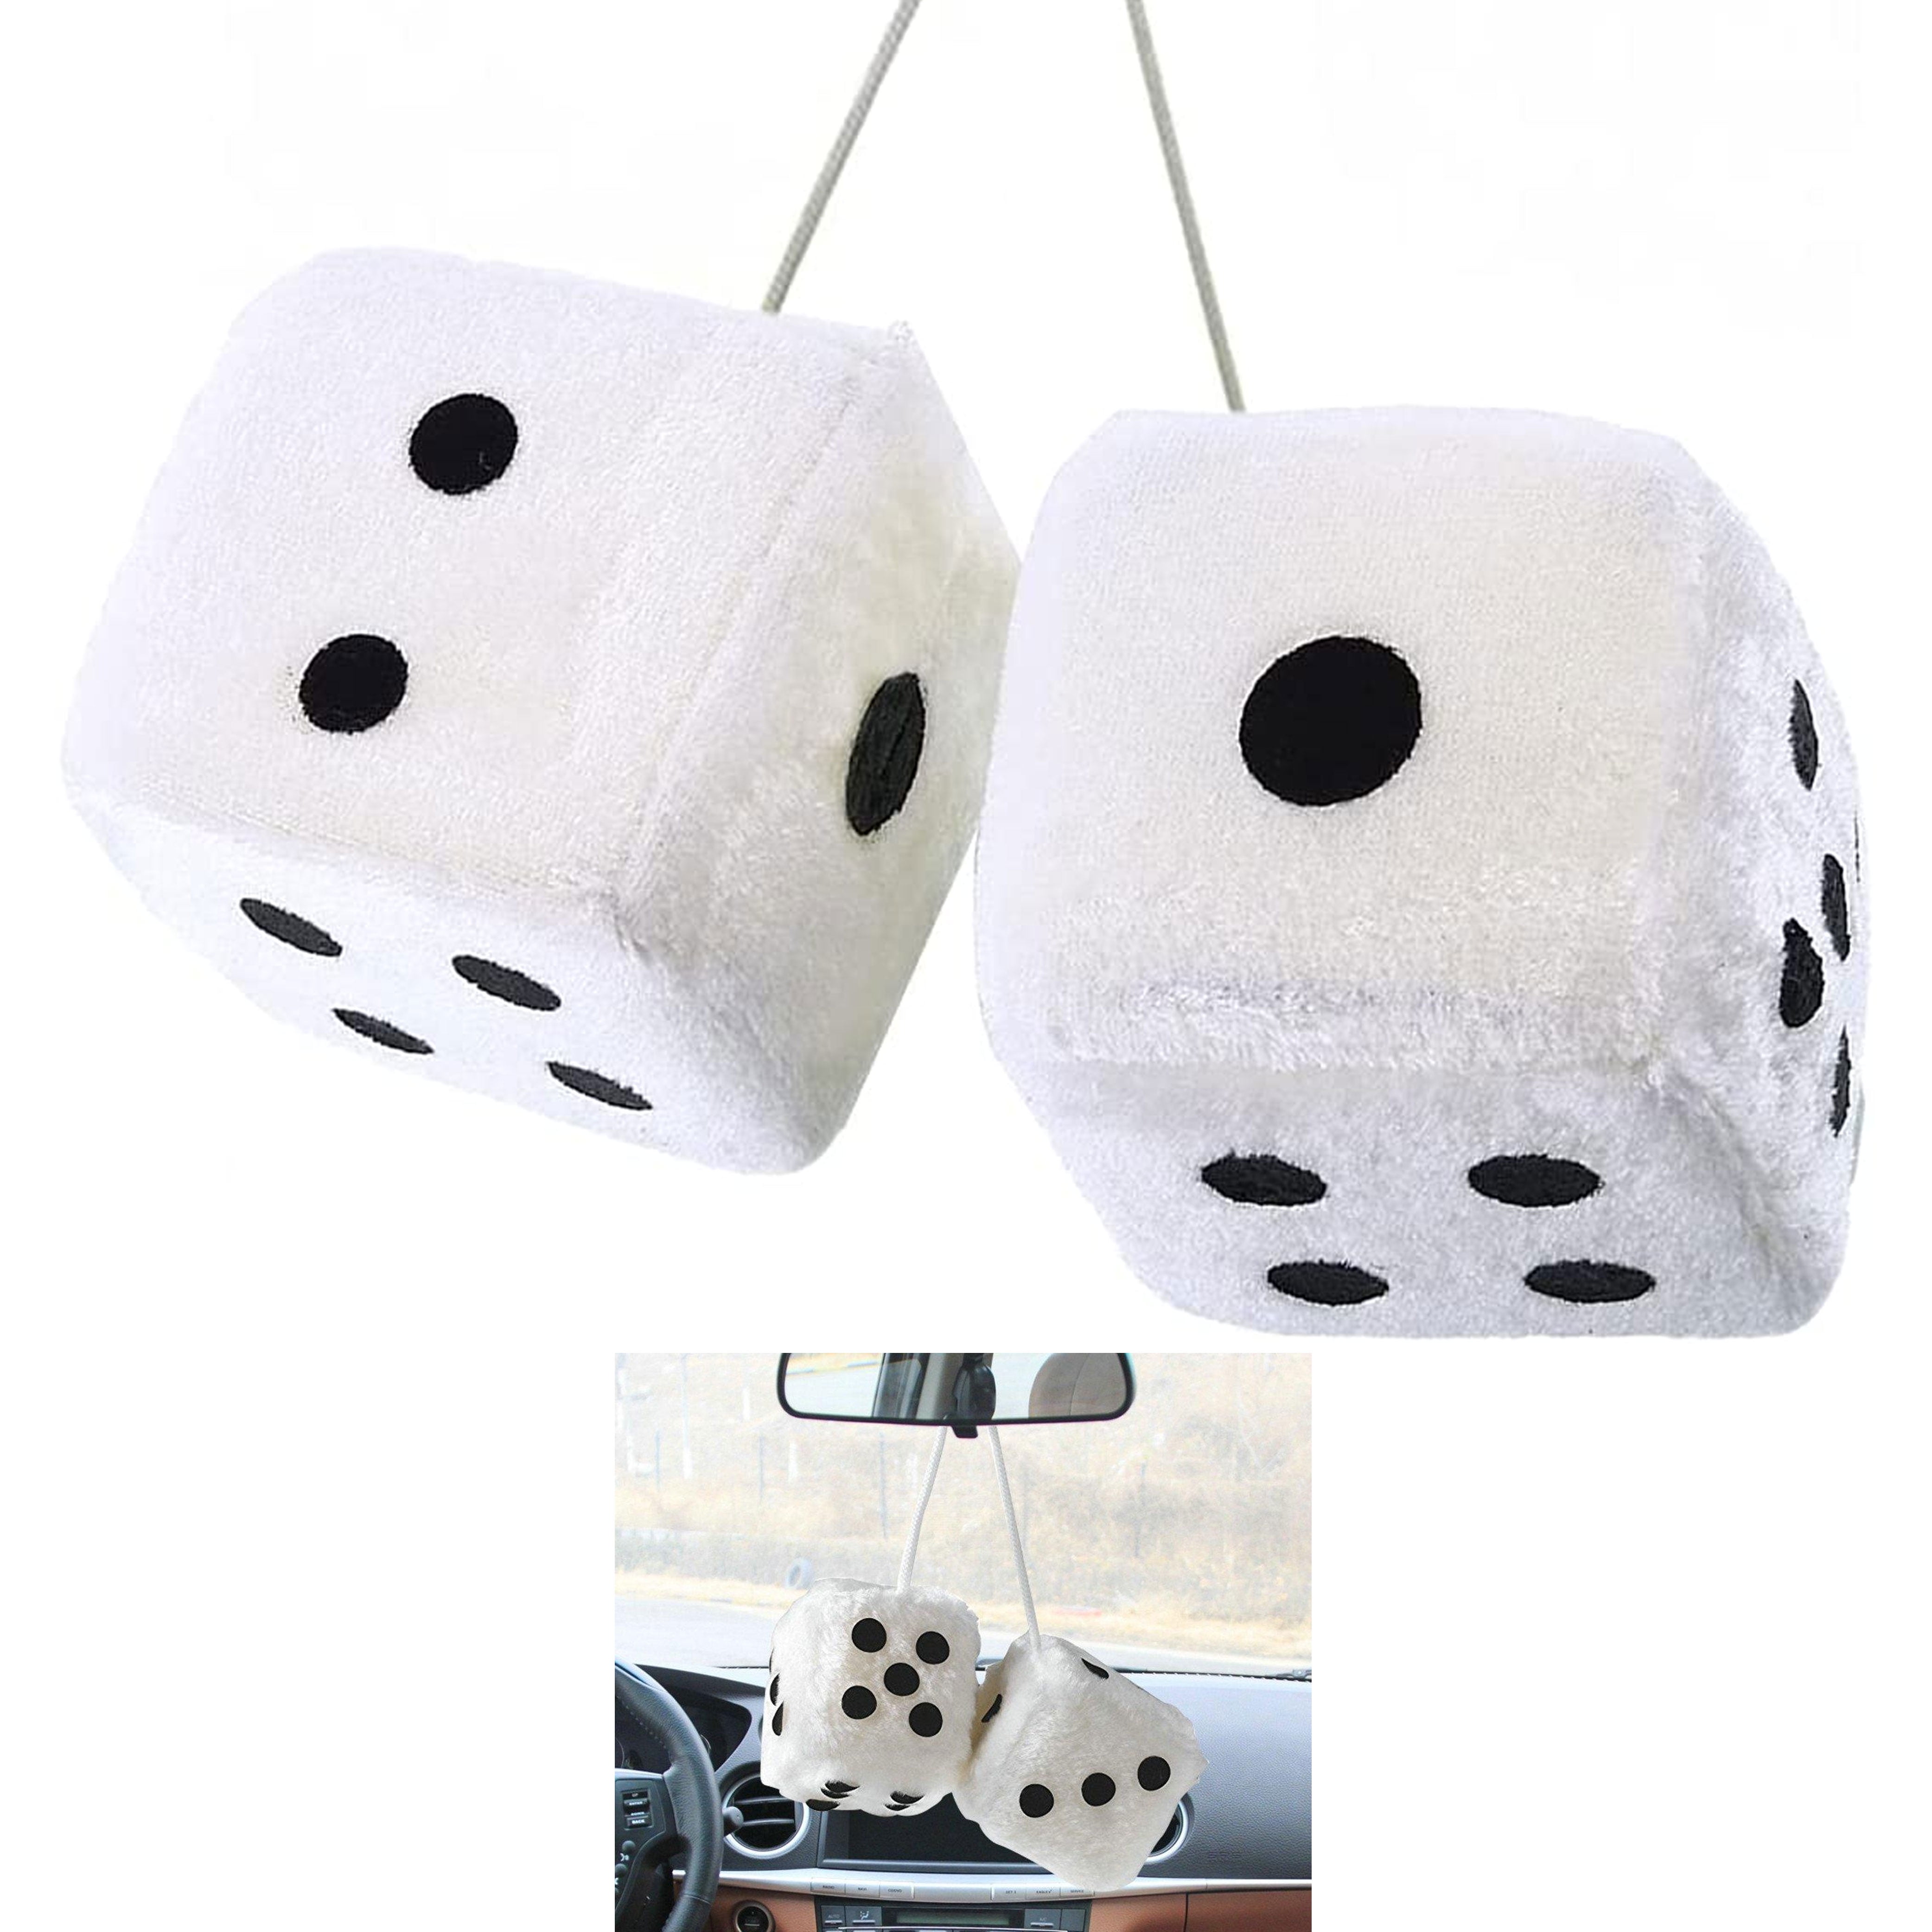 1 Pair Auto White Fuzzy Dice Front Car Plush Hanging Rearview Mirror Decors